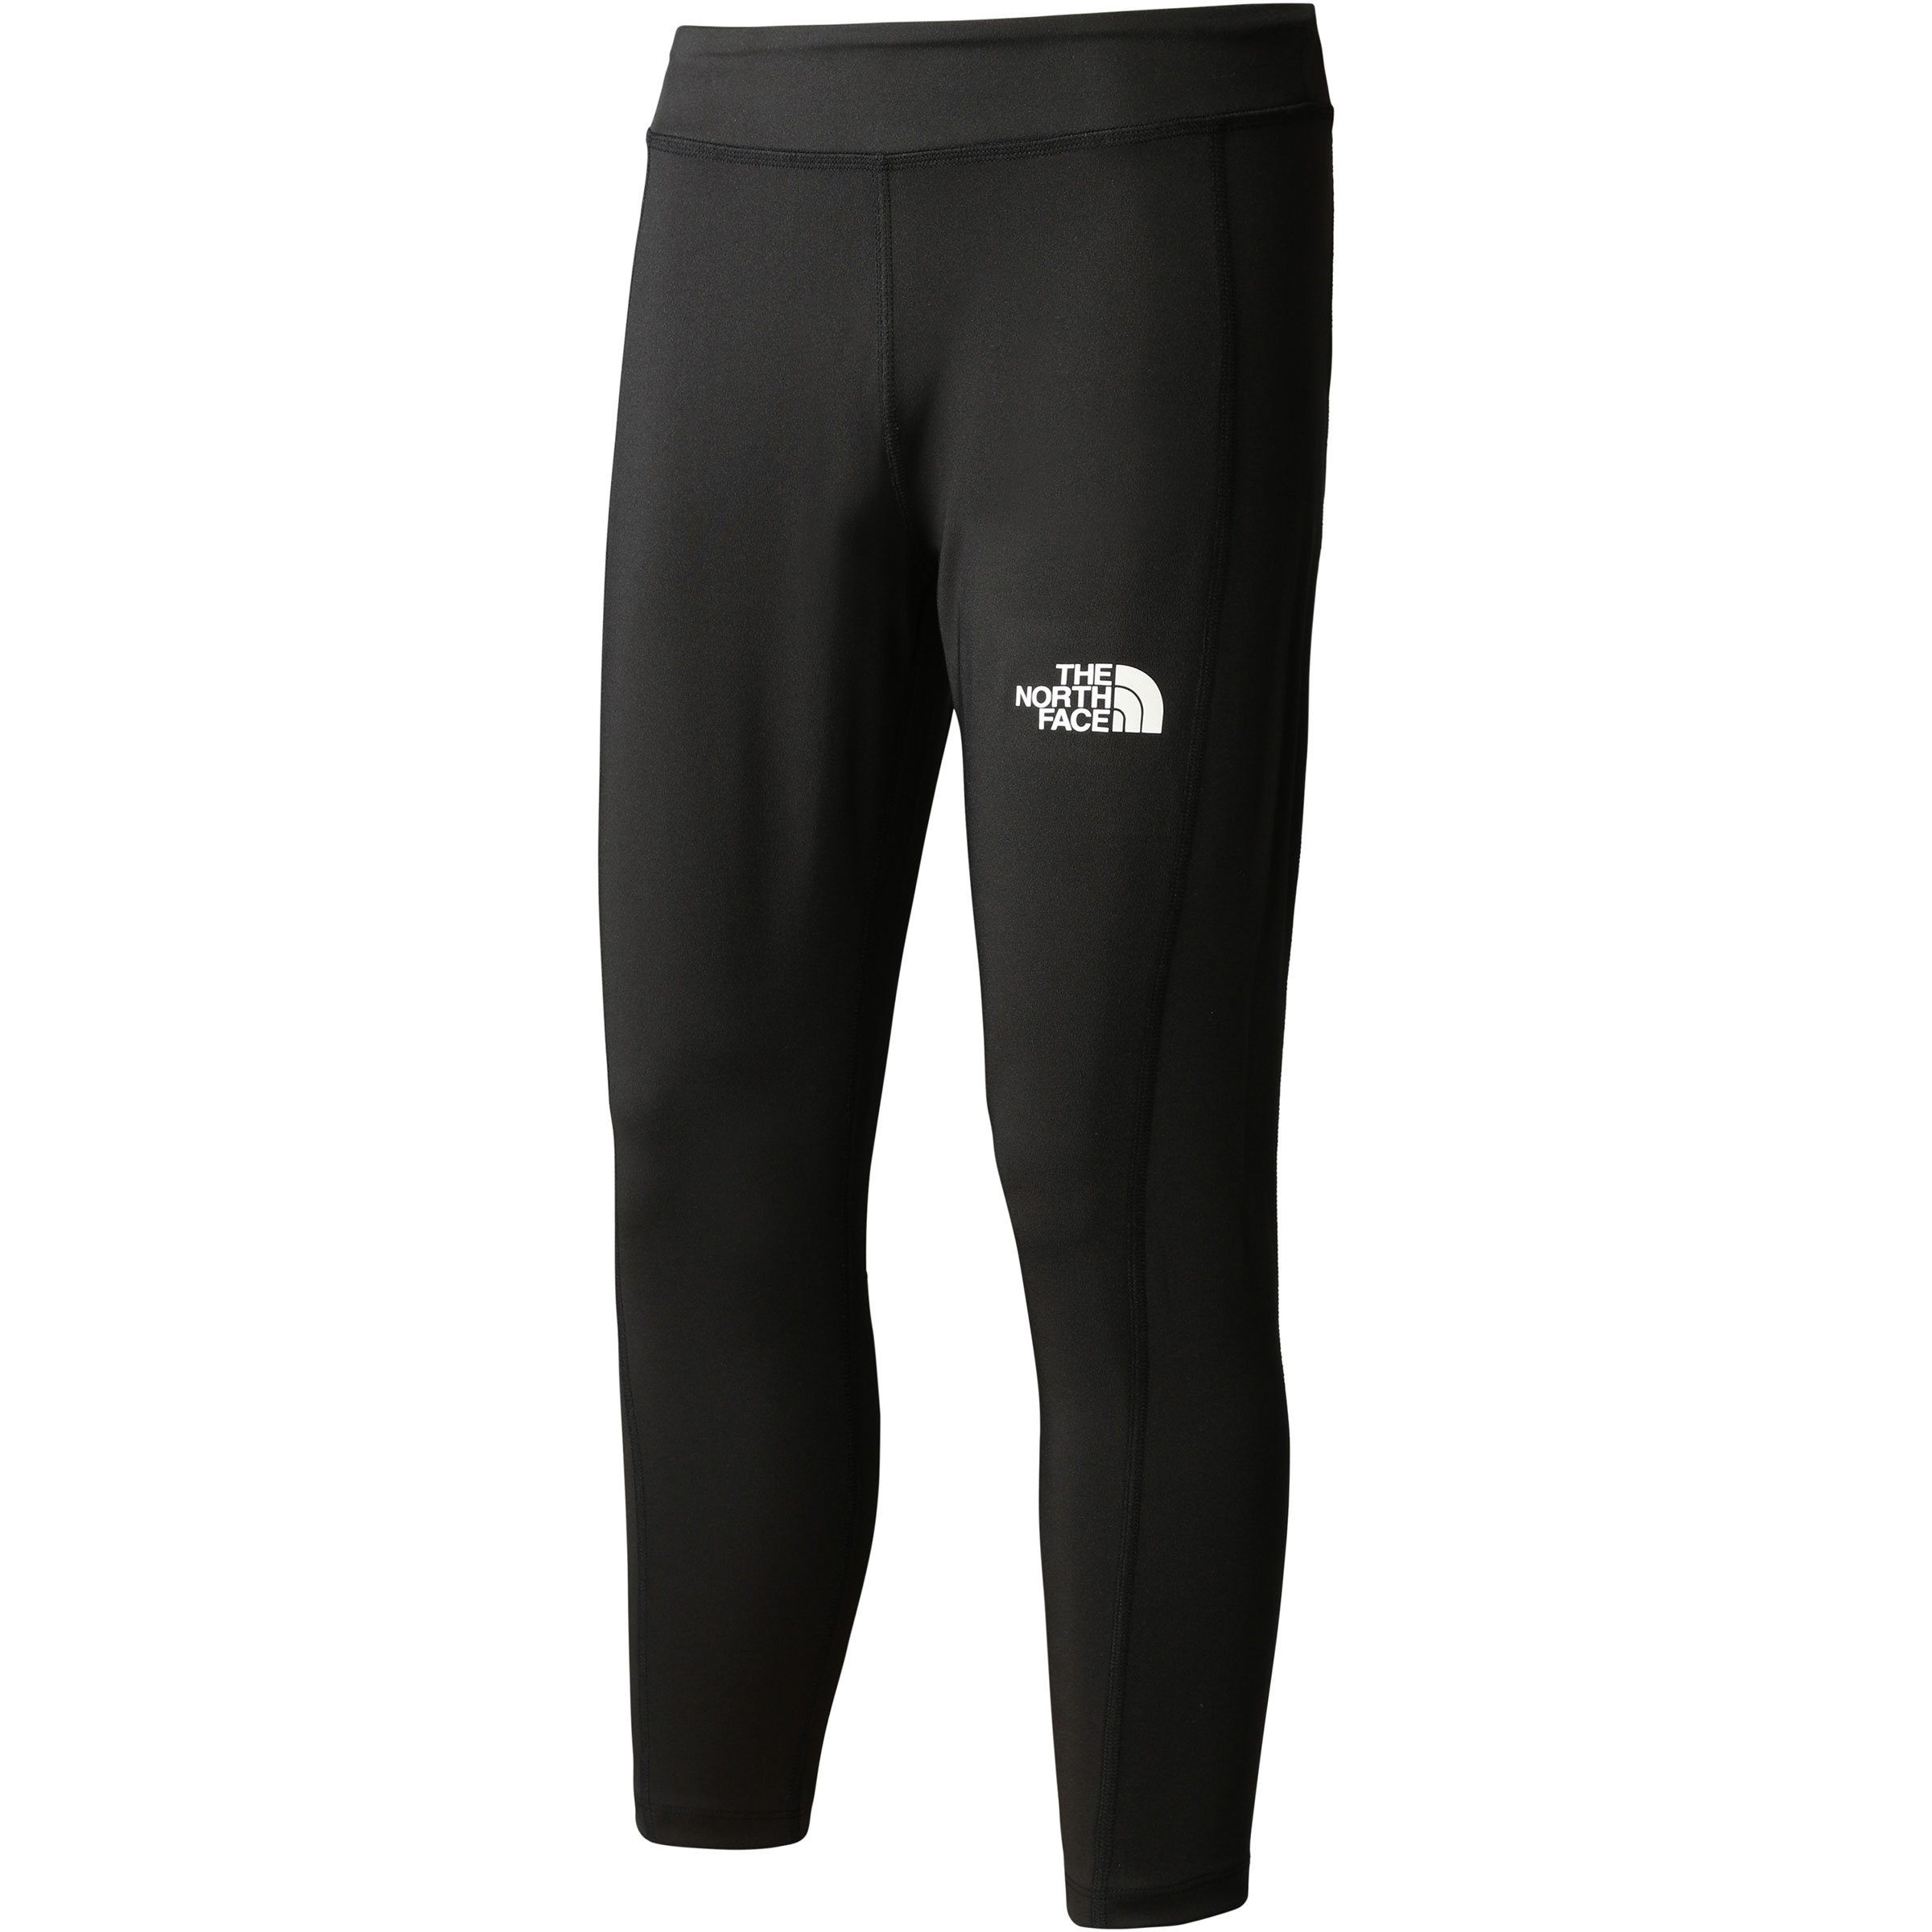 The North Face Tights & Leggings